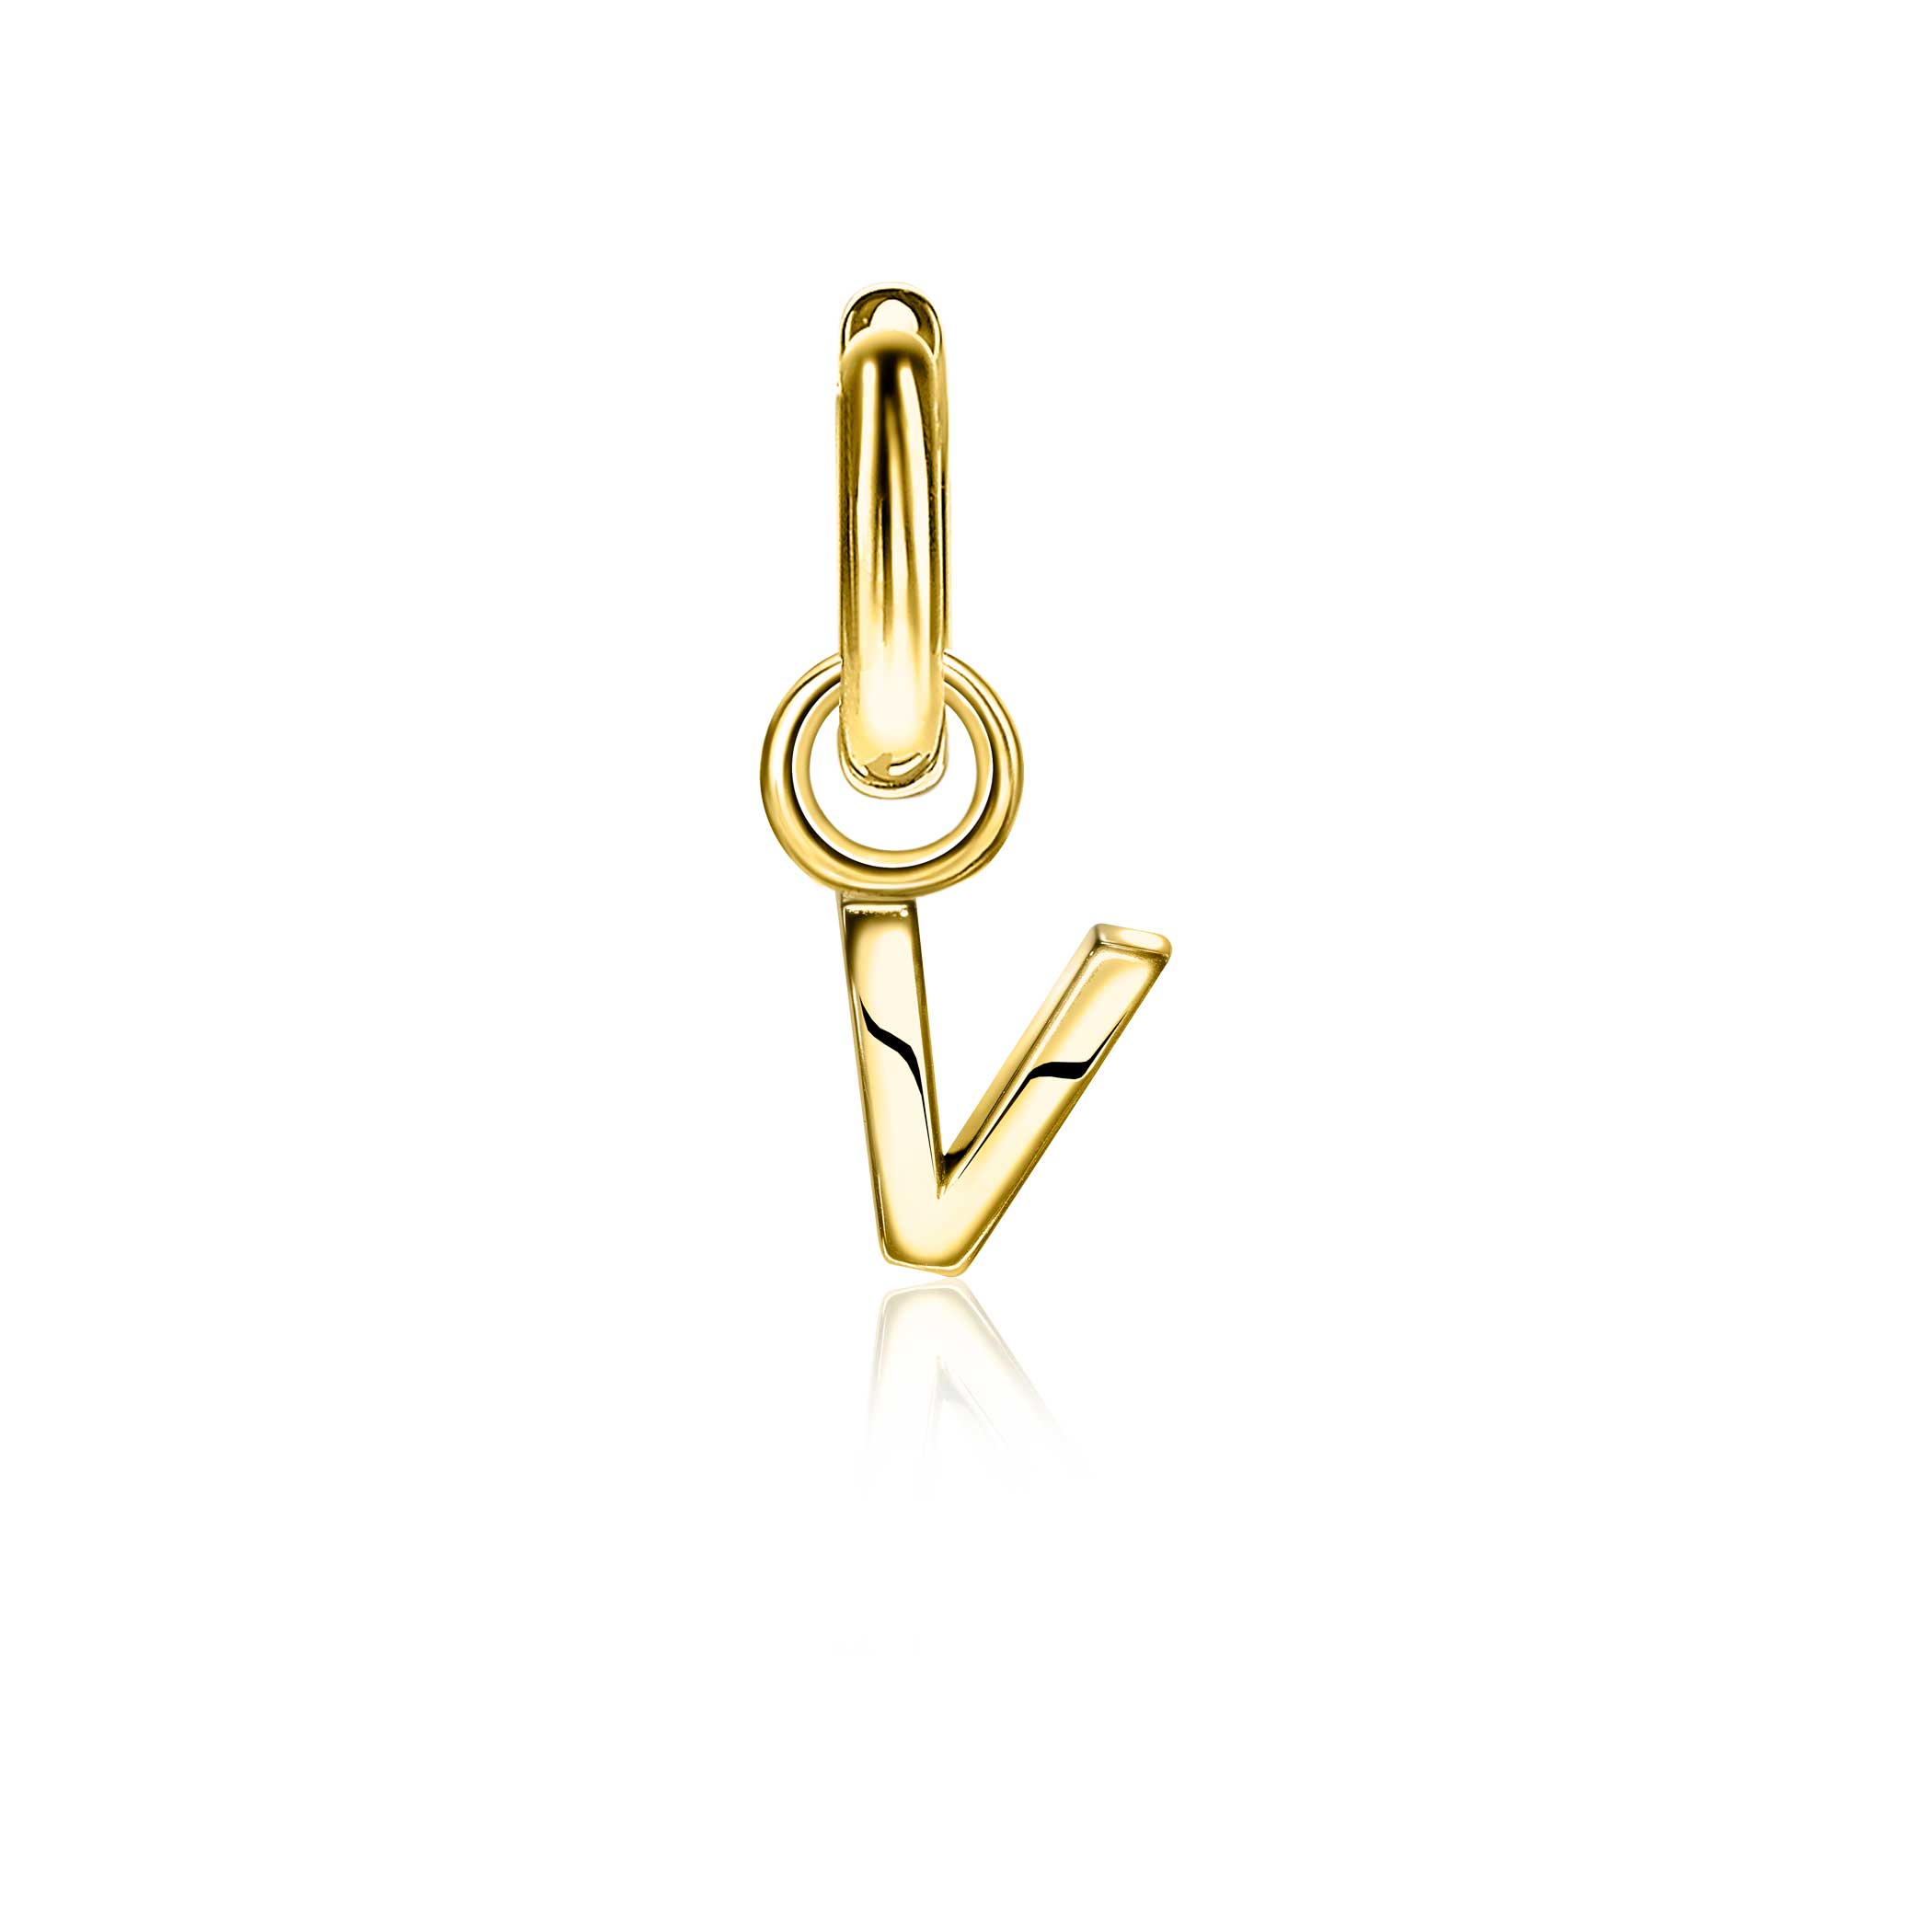 ZINZI Gold Plated Letter Earrings Pendant V price per piece ZICH2145V (excl. hoop earrings)